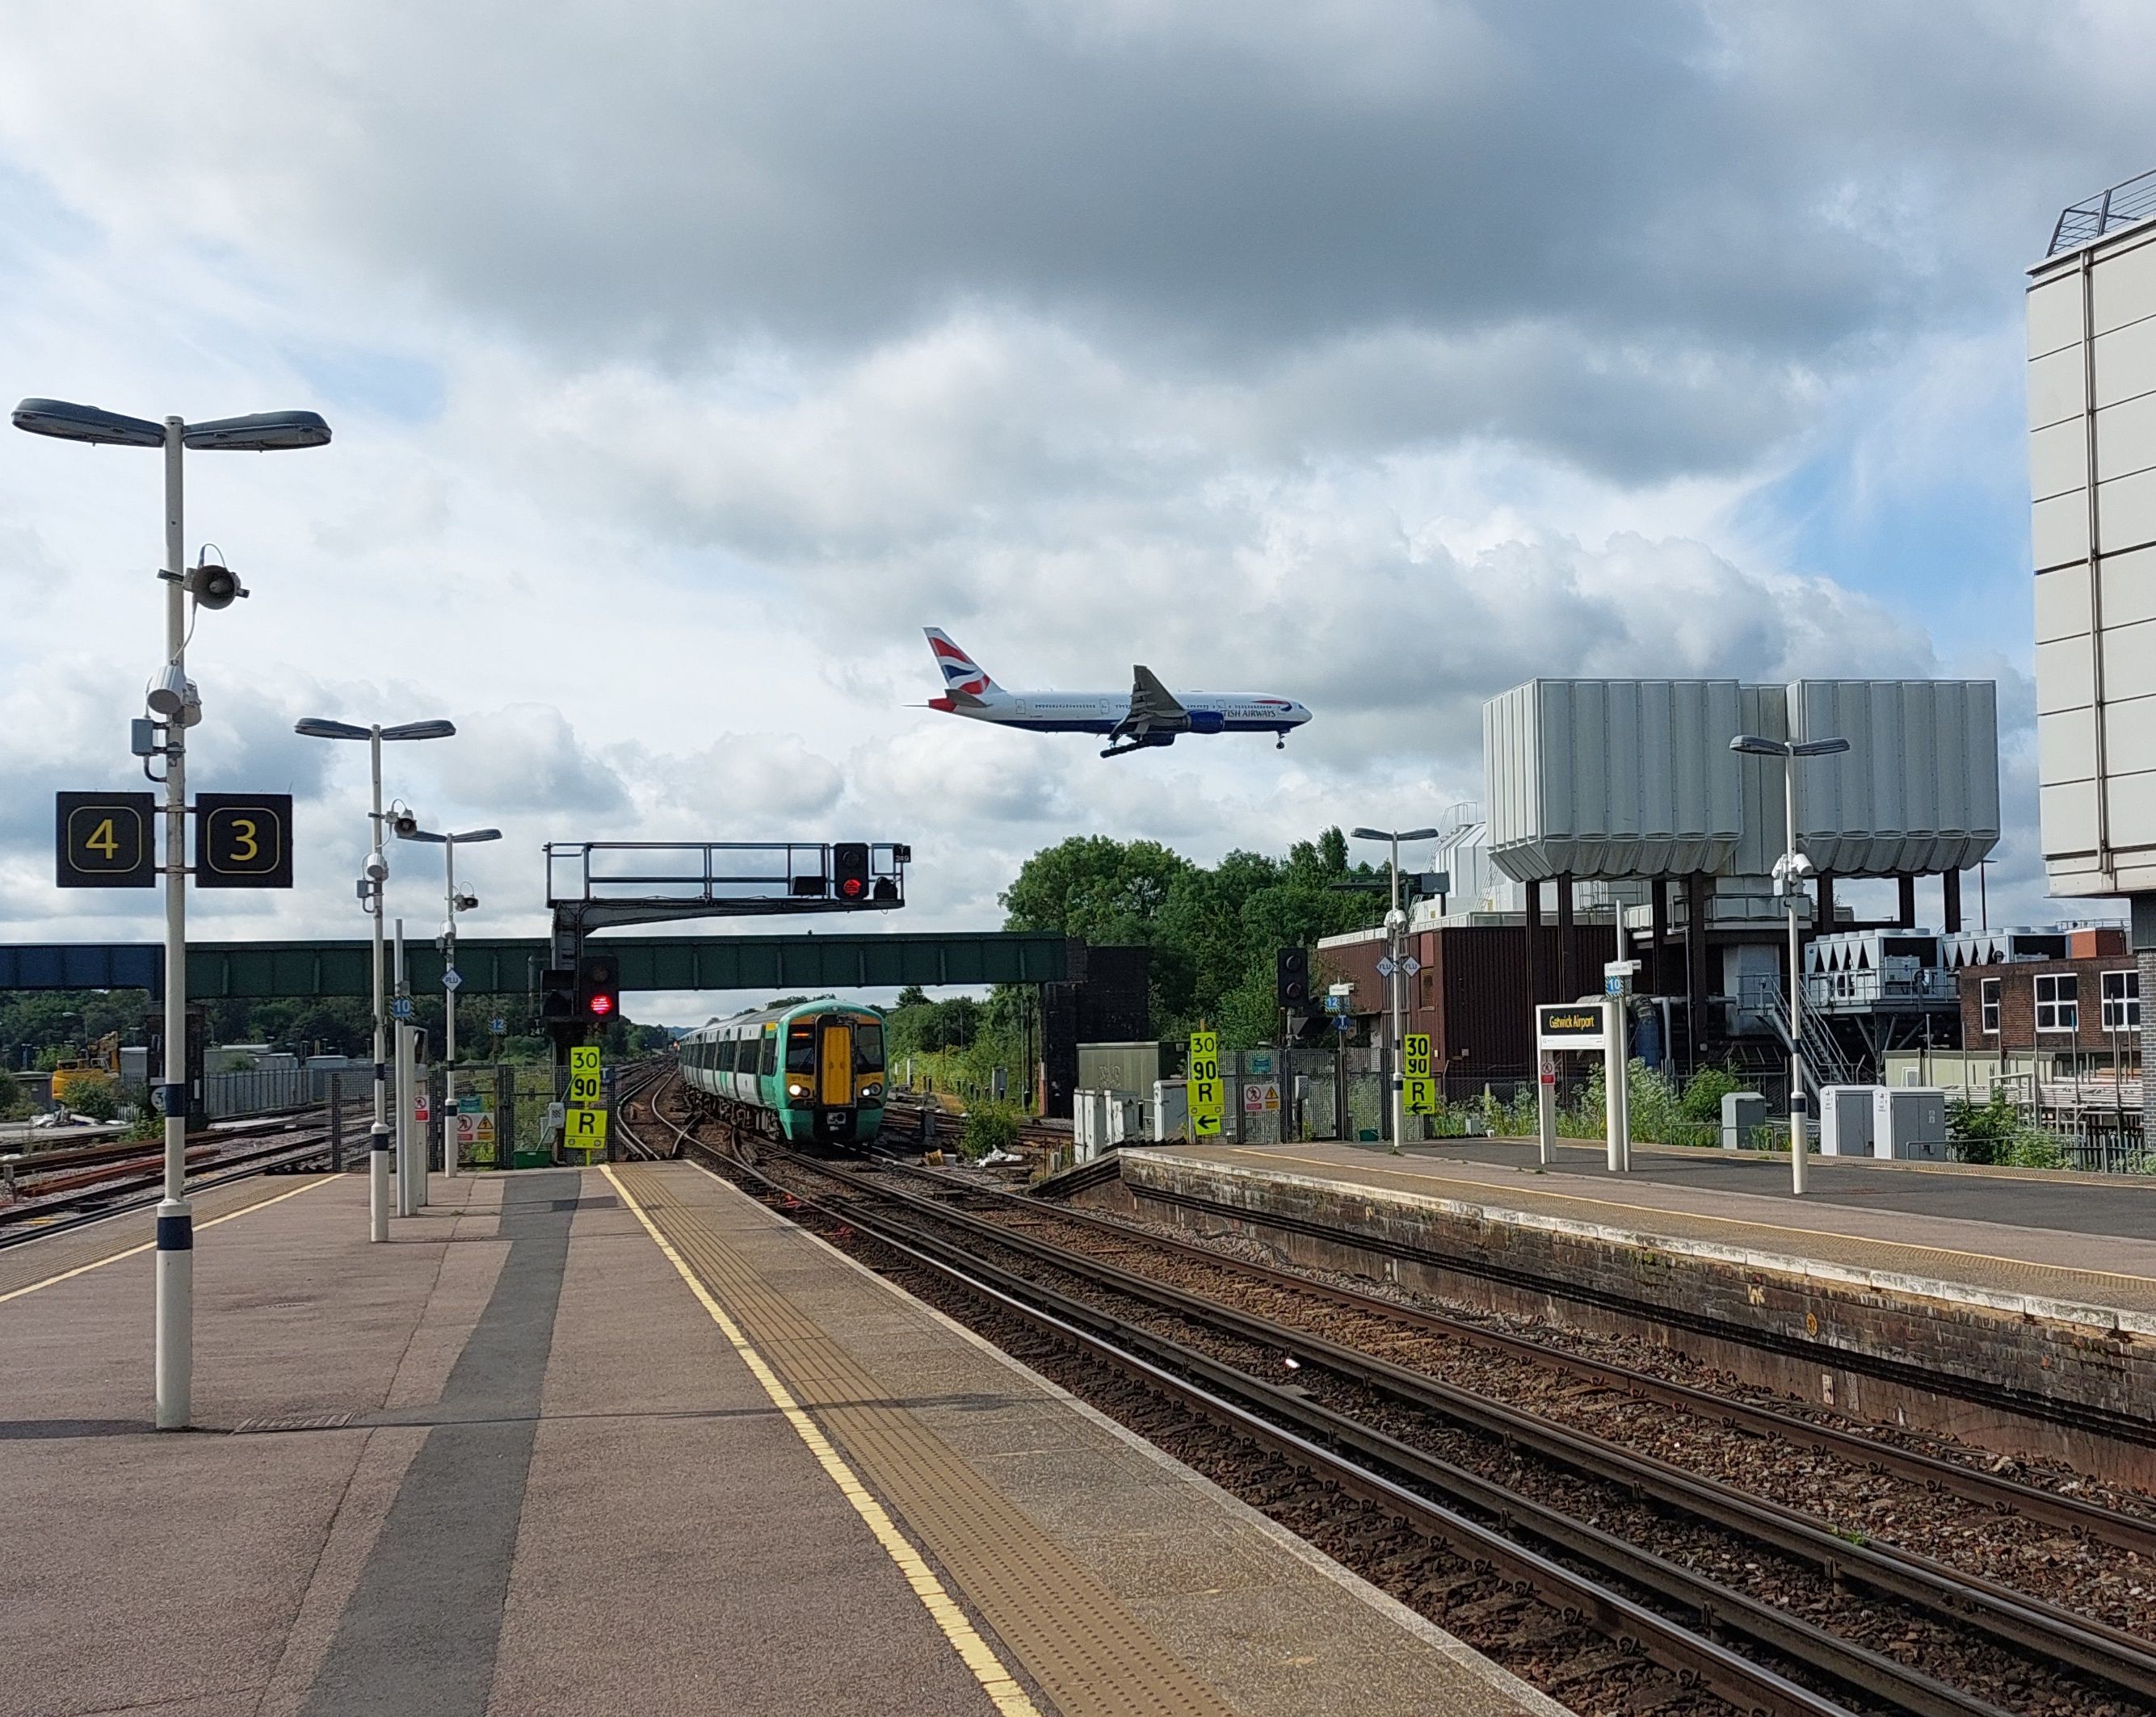 View from the Gatwick Airport Railway station as a British Airways aircraft is about to land.